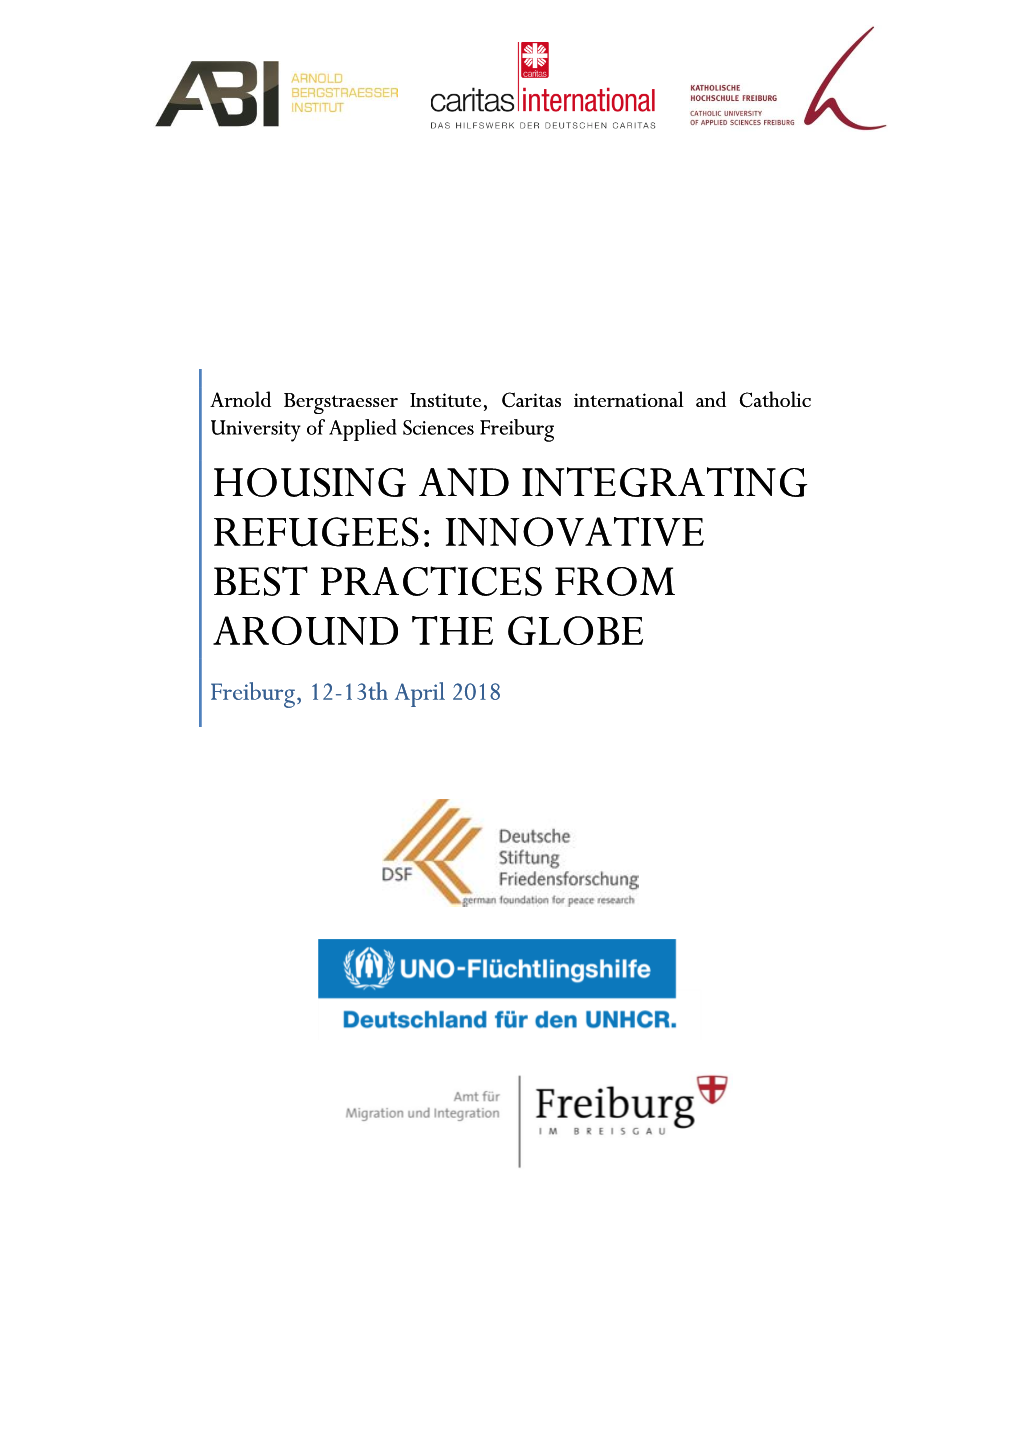 Housing and Integrating Refugees: Innovative Best Practices from Around the Globe